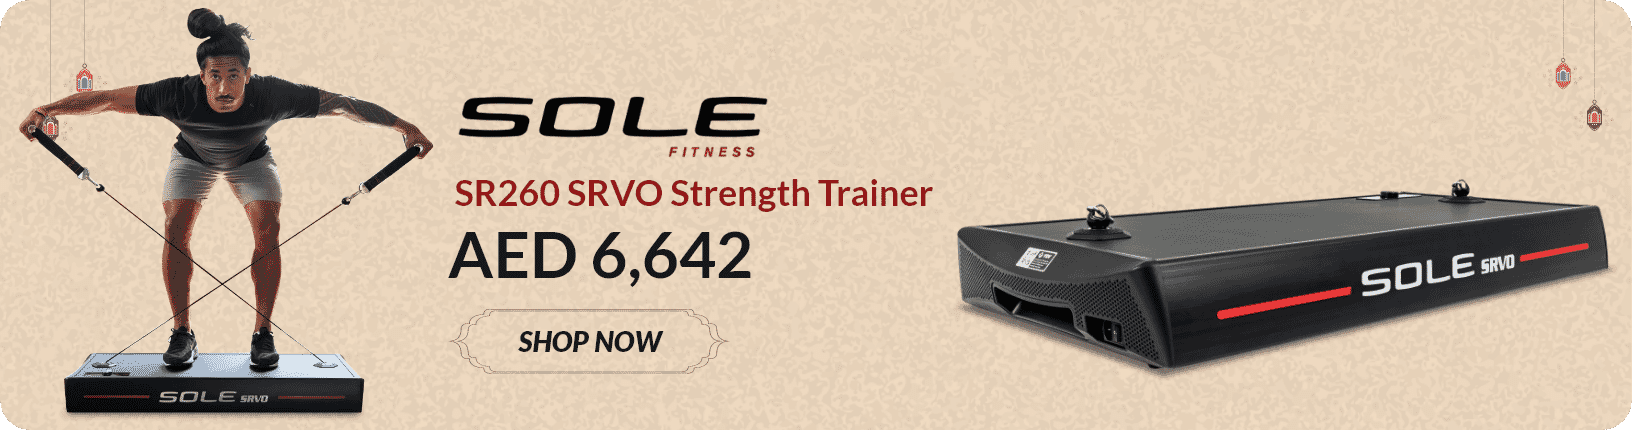 sole fitness functional trainer